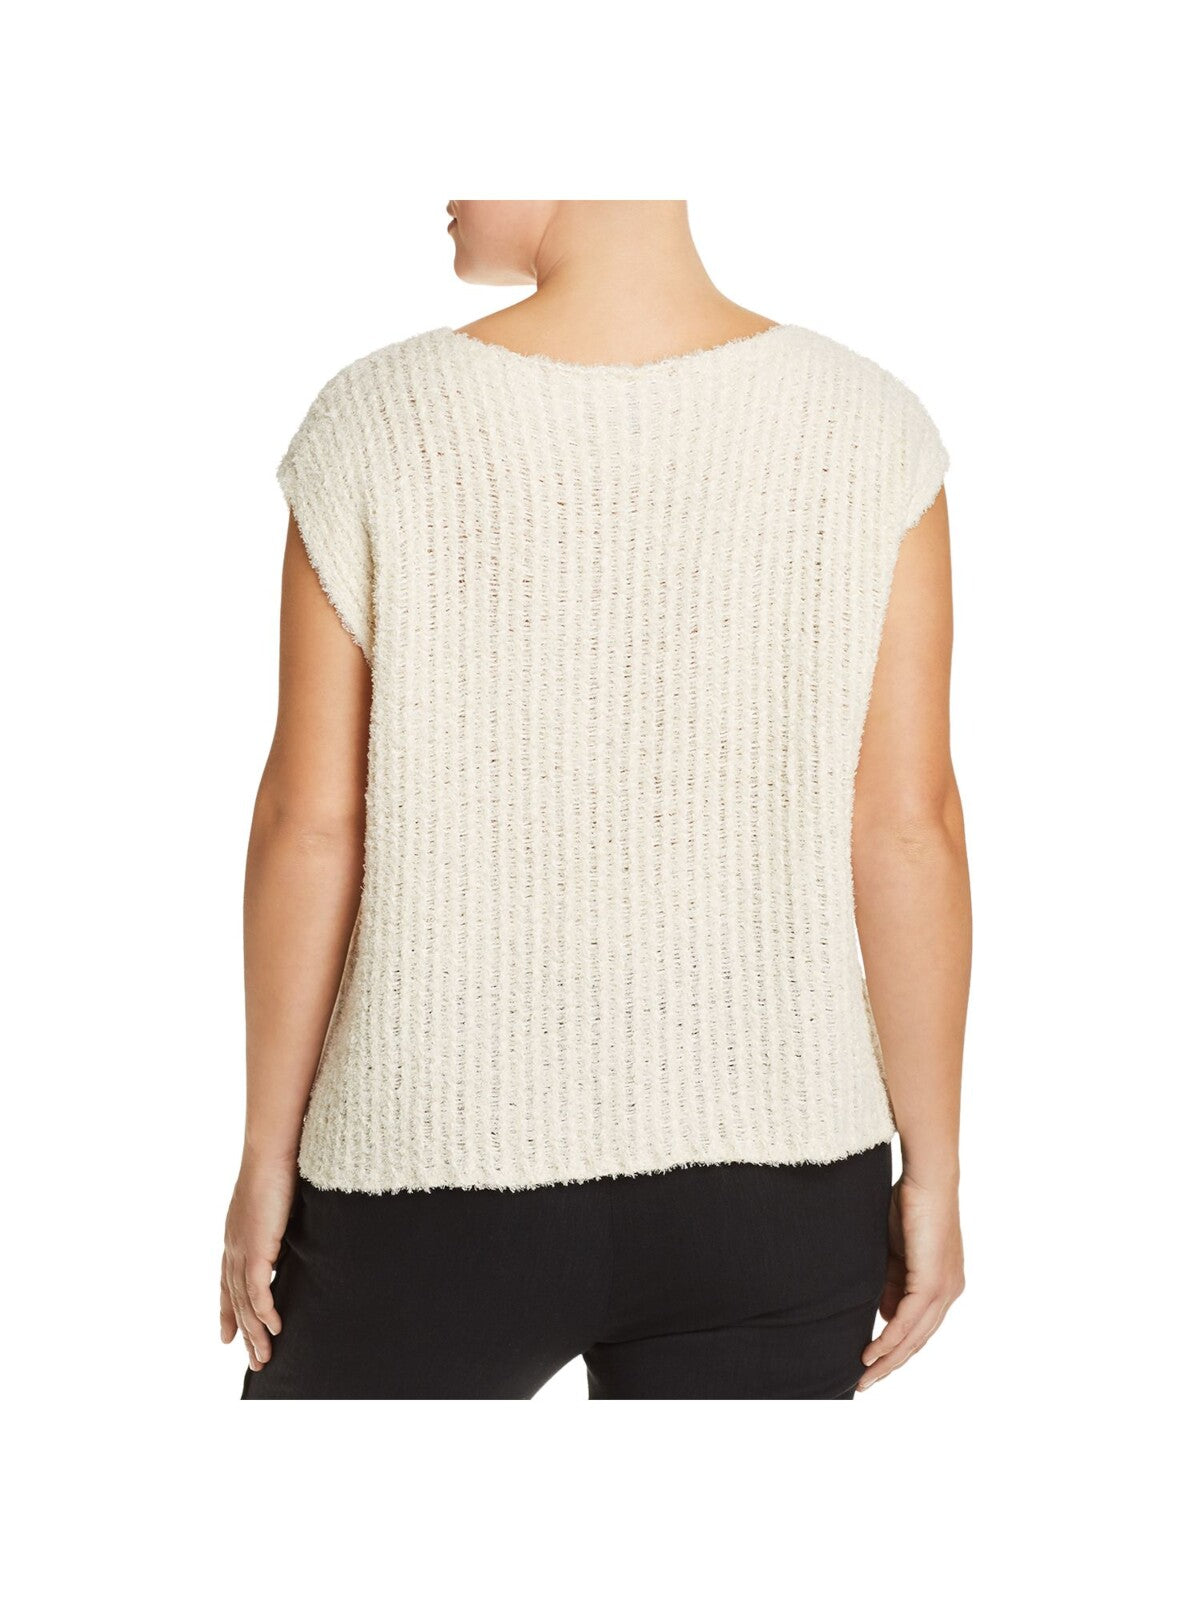 EILEEN FISHER Womens Beige Stretch Ribbed Knit Cap Sleeve Boat Neck Sweater Plus 3X